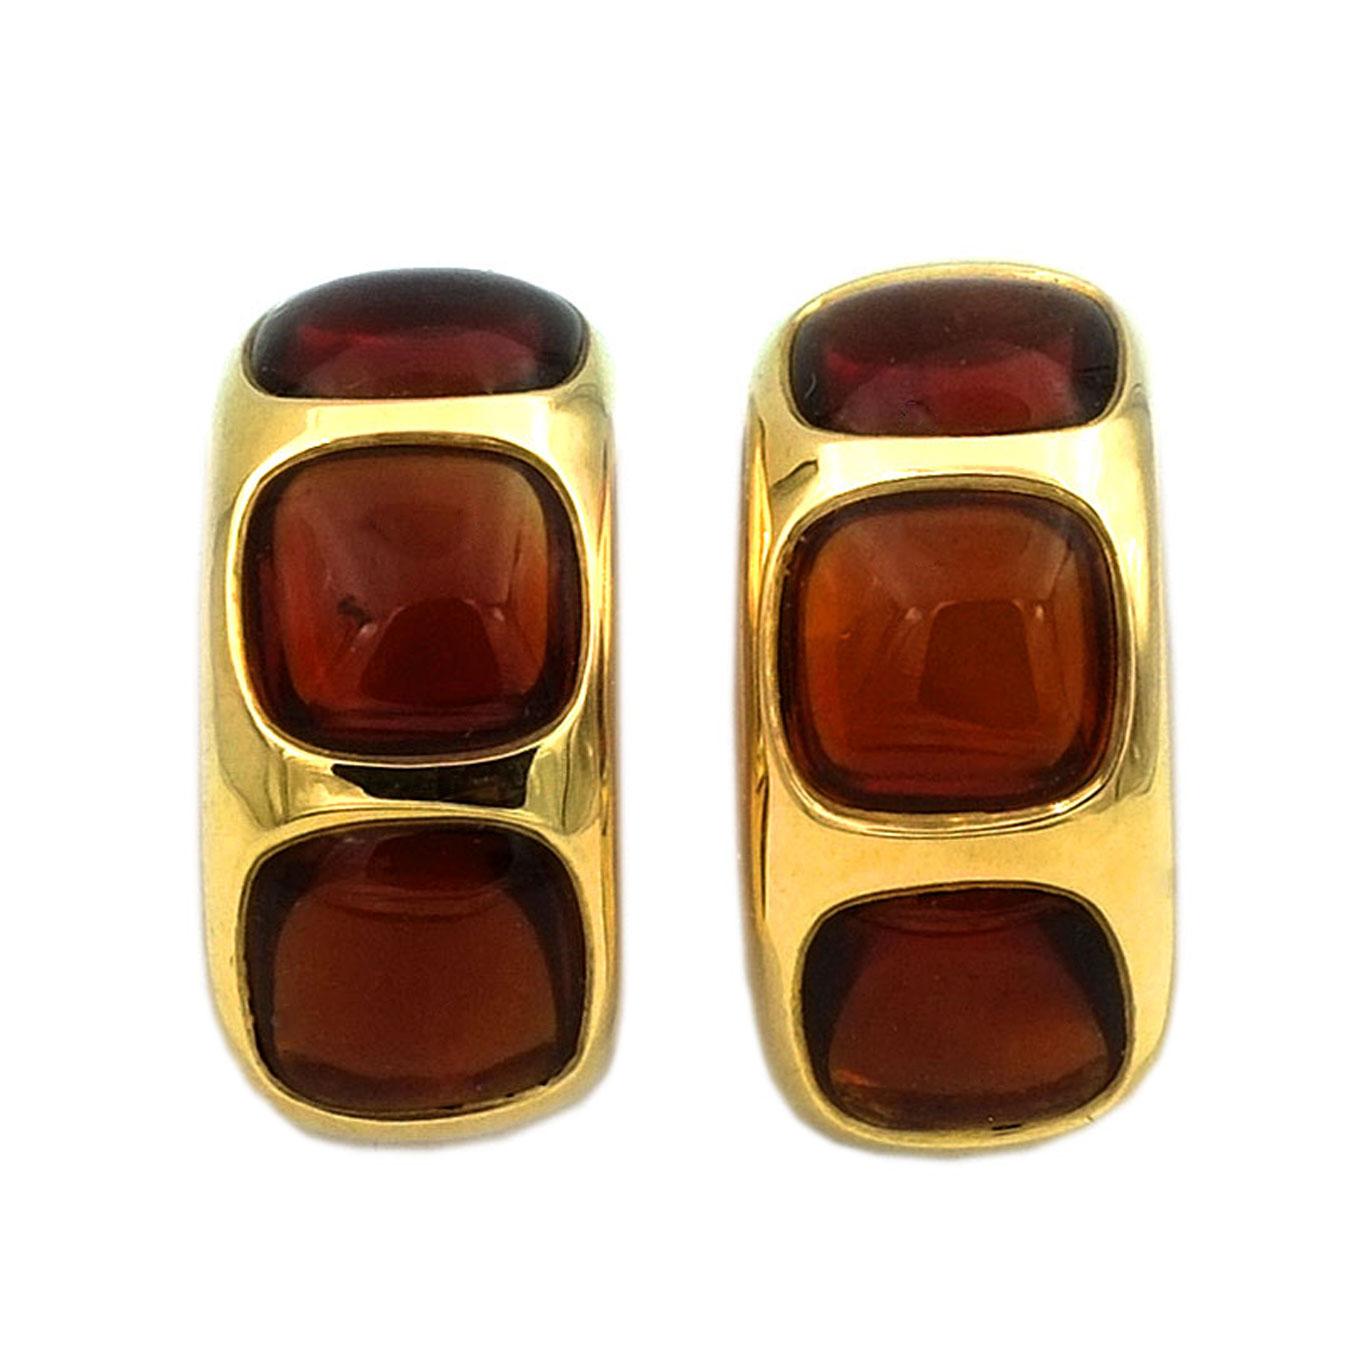 Pomellato 18K Yellow Gold Madeira Citrine Cabochon Earrings

Sporty, elegant pomellato gold earrings as wide, massive and hinged hoop earrings, each set with three orange-brown Madeira citrine cabochons.

Authentic pair of earrings from the Milan